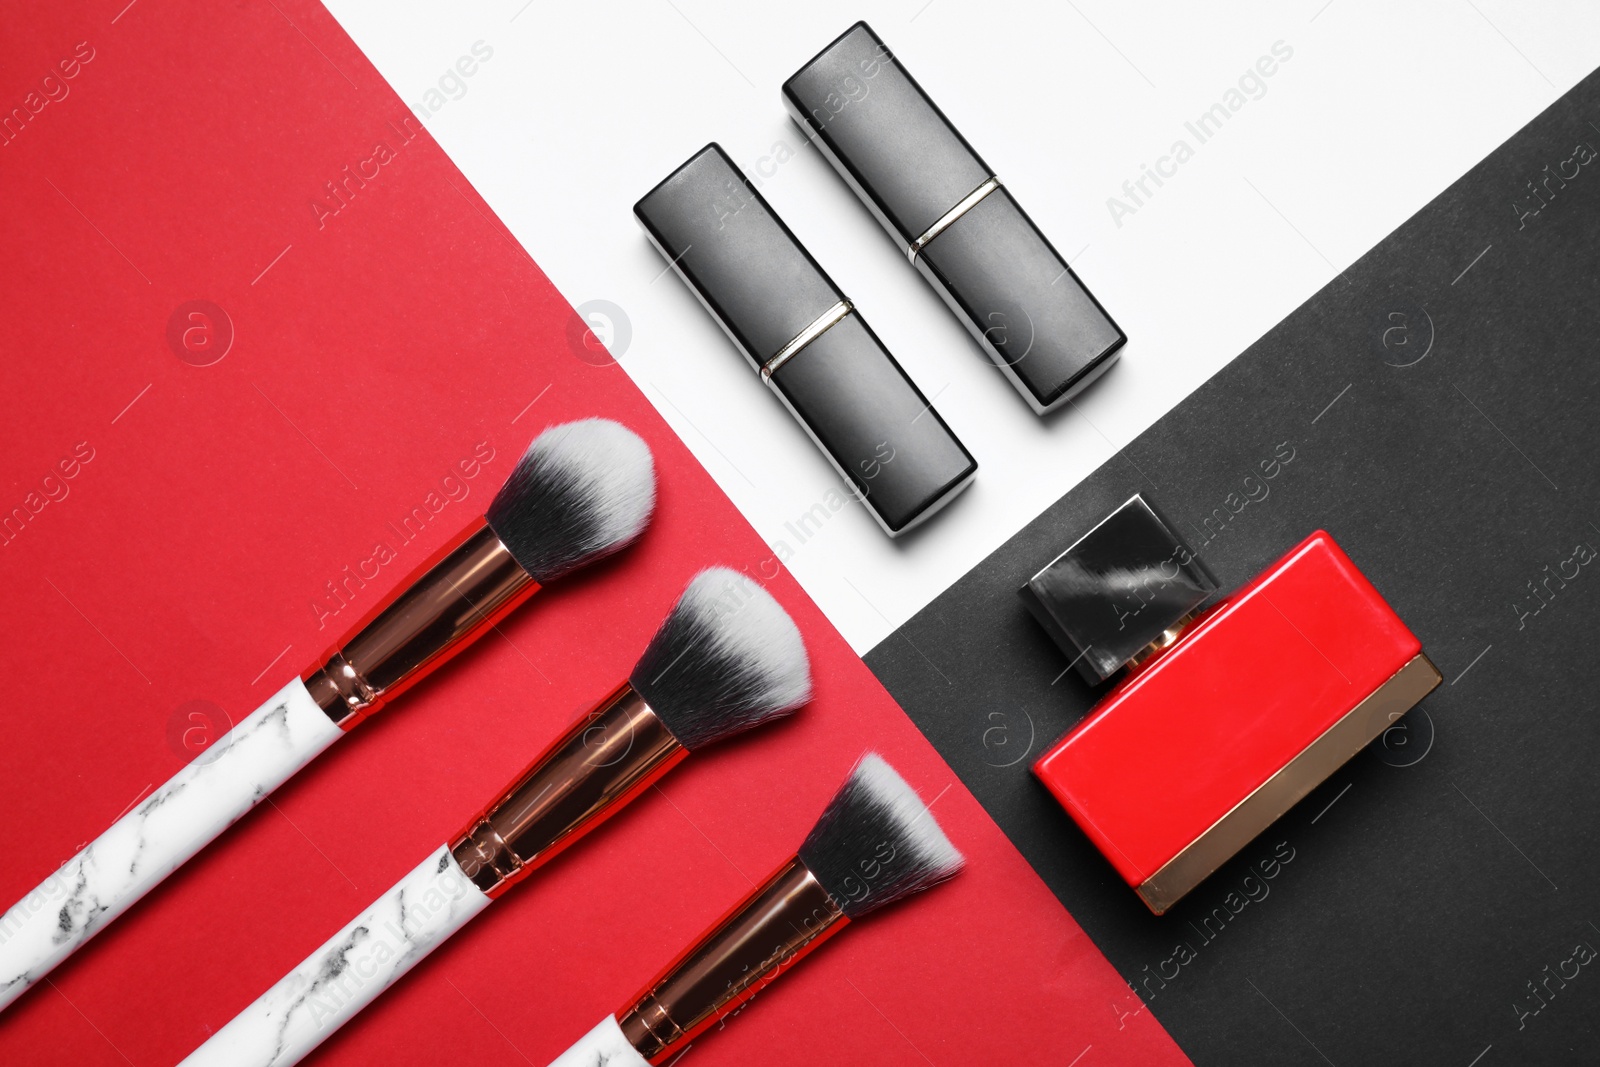 Photo of Makeup brushes, lipsticks and bottle of perfume on color background, flat lay